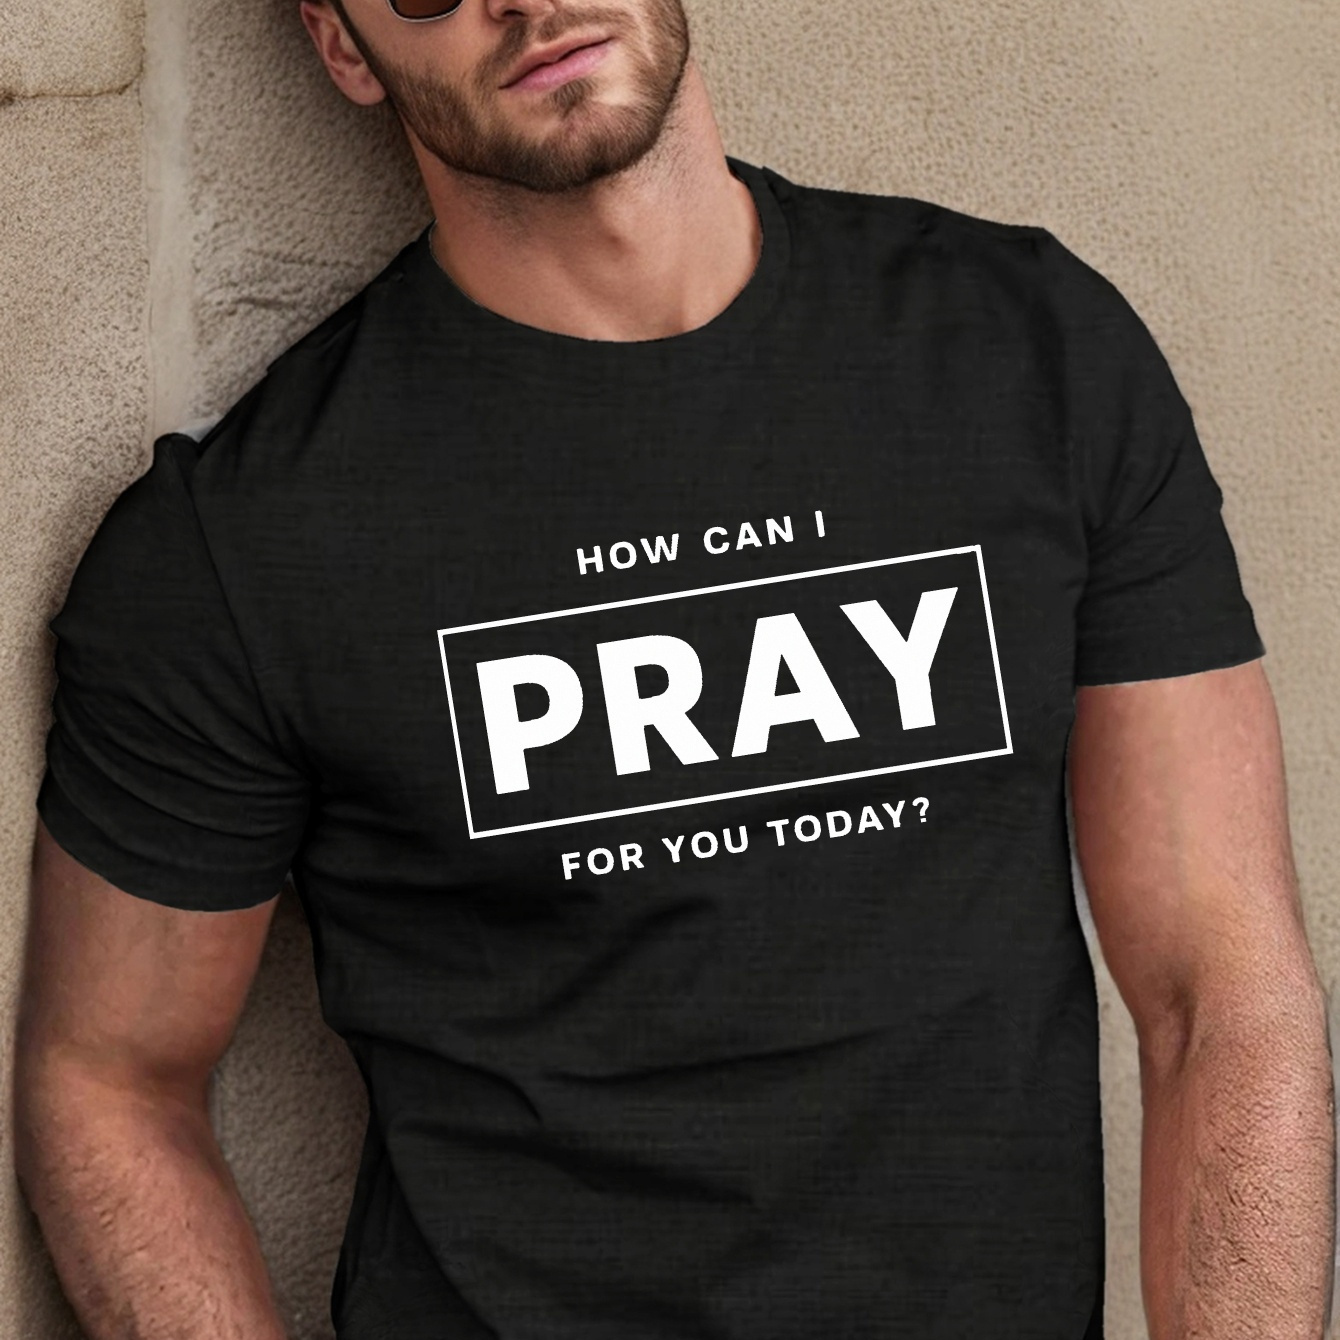 

1 Pc, 100% Cotton T-shirt, Men's Casual Crew Neck T-shirt With Stylish "how Can I Pray For You Today" Print, Trendy Short Sleeve Top For Summer Daily Wear